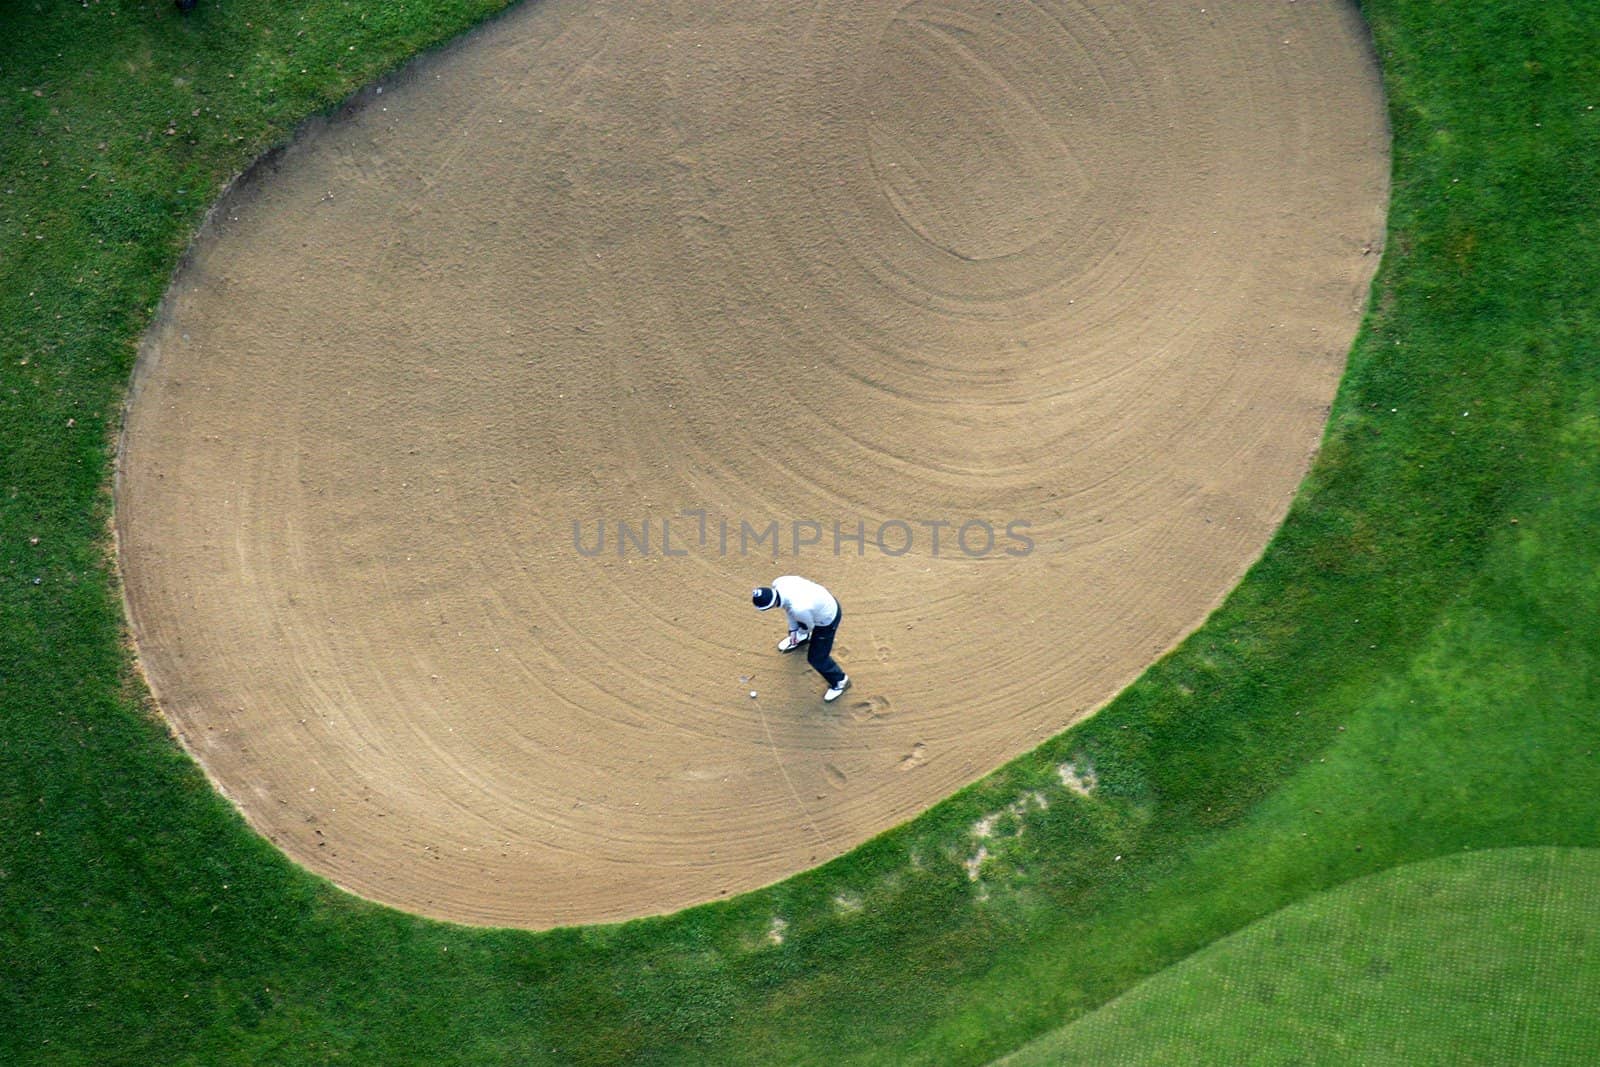 Golfer trying to put the ball out of the sand